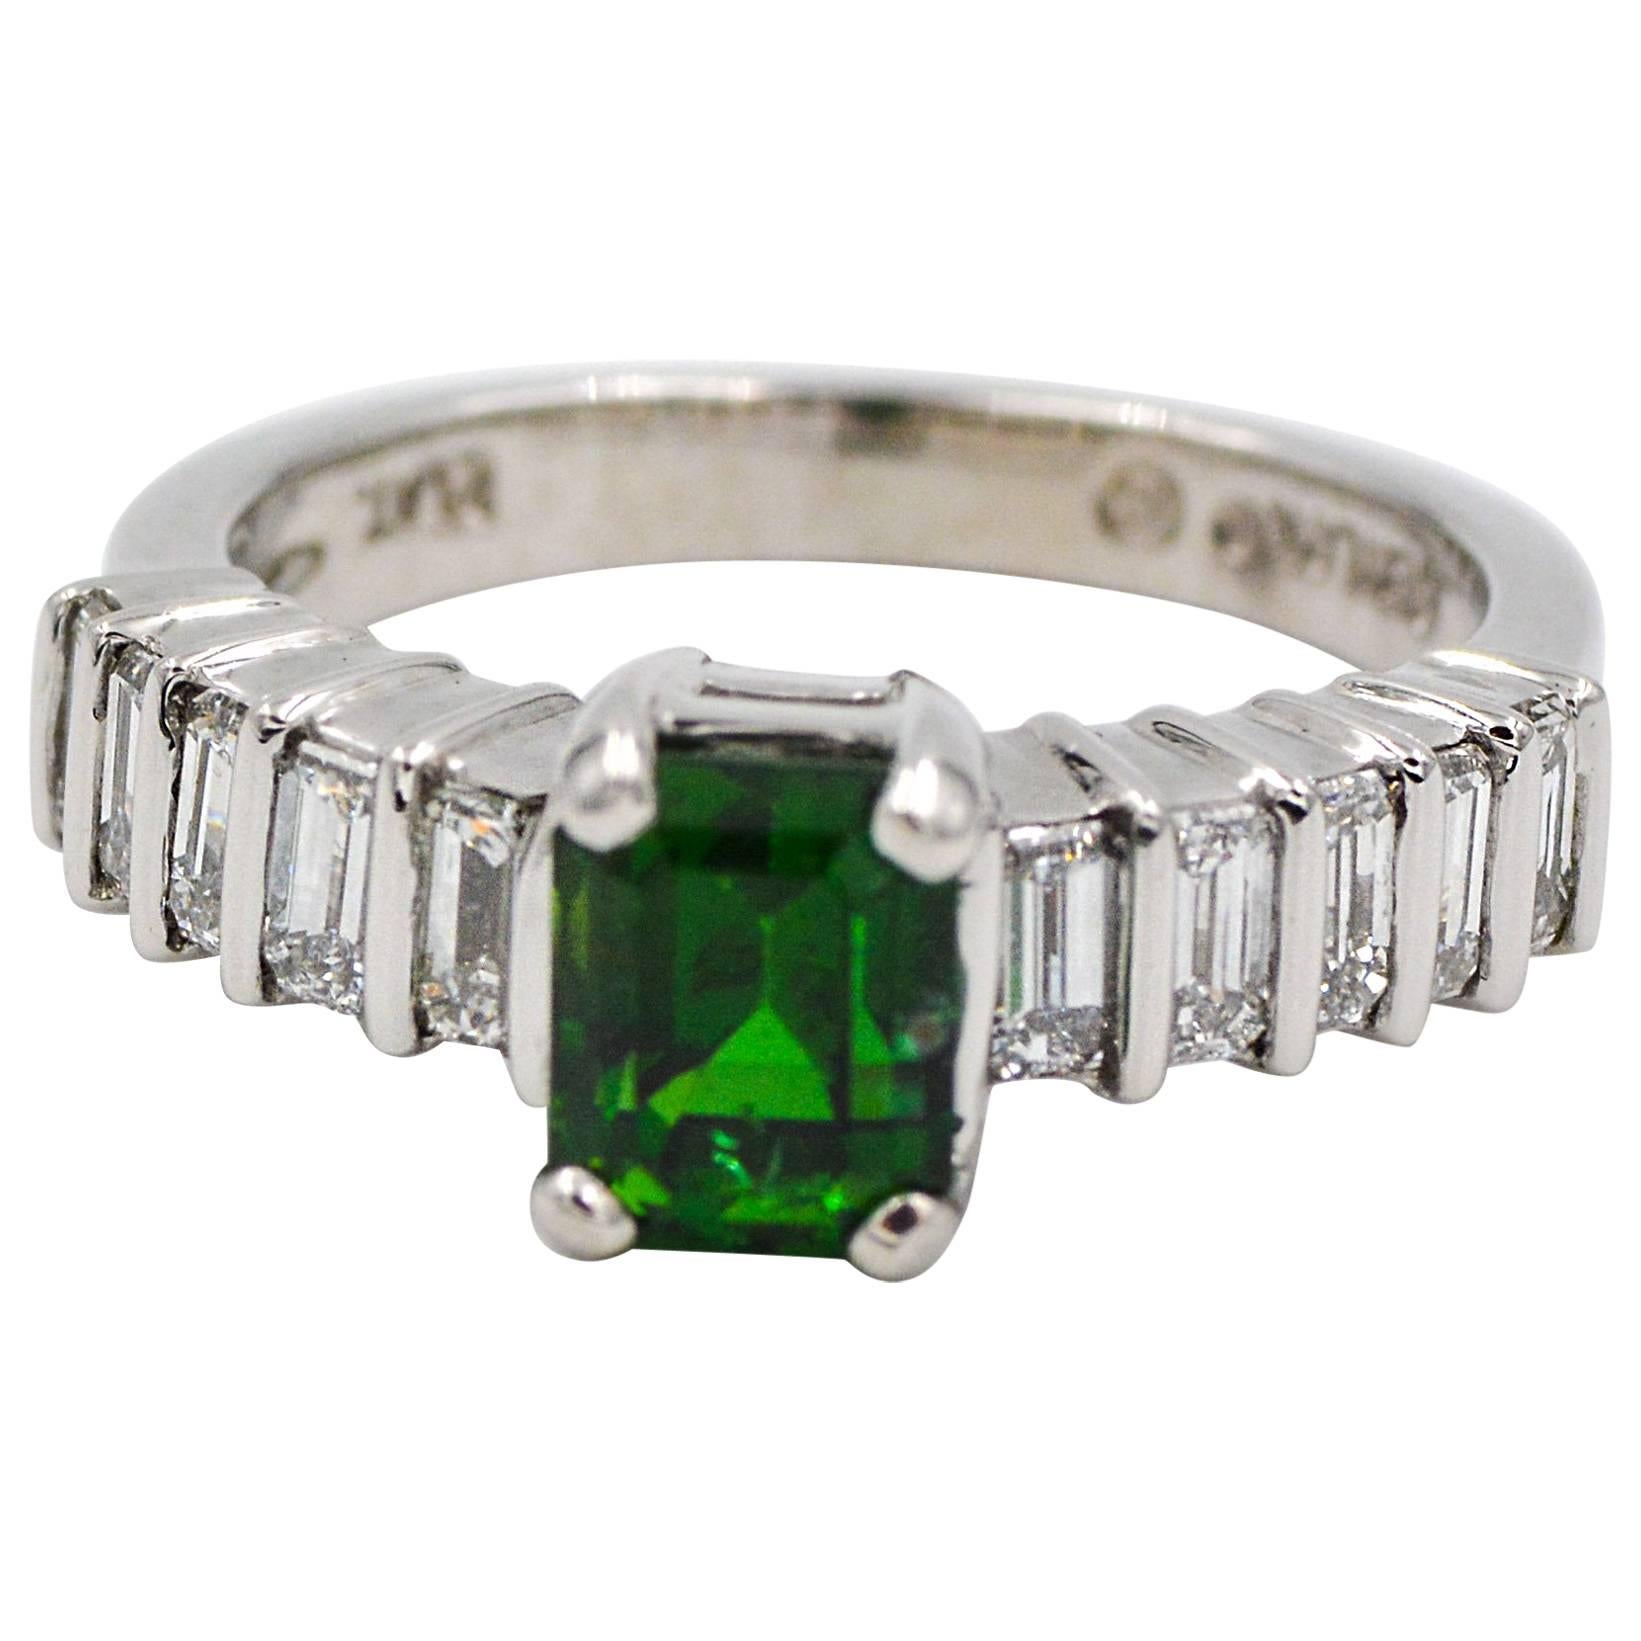 This beautiful platinum ring is centered by a vivid green emerald cut tourmaline.  The tourmaline is accented by ten baguette cut diamonds that are bar set length wise, five on each side of the beautiful tourmaline center stone.  The accent diamonds